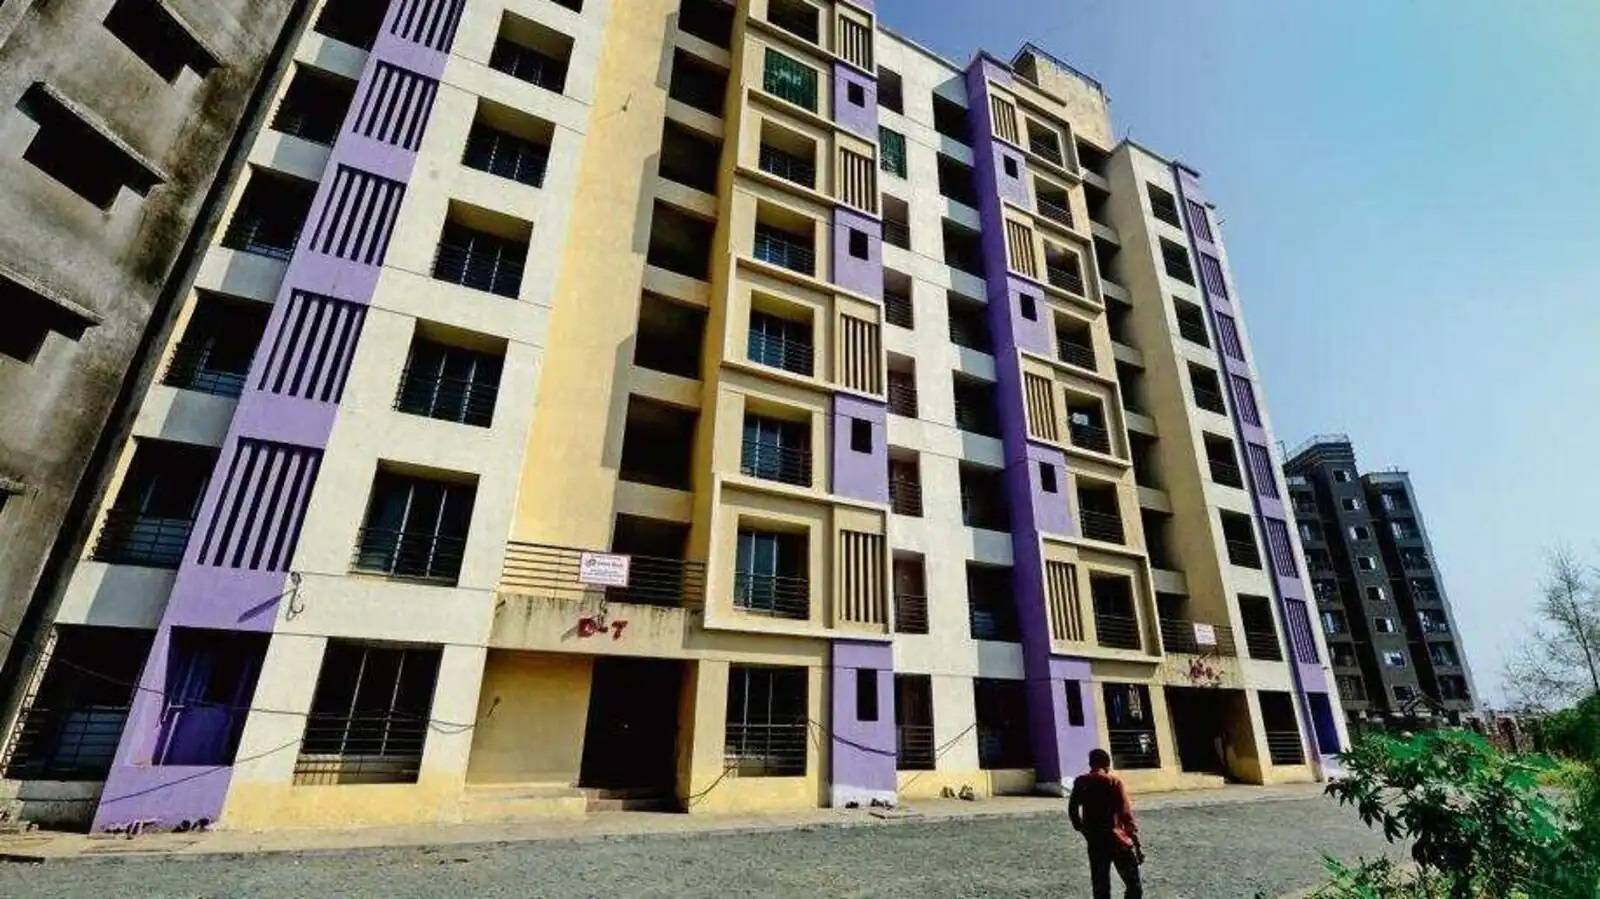 Residential Sale in Fy24 Reached a Decadal High With Almost 5 Lakh Units Sold